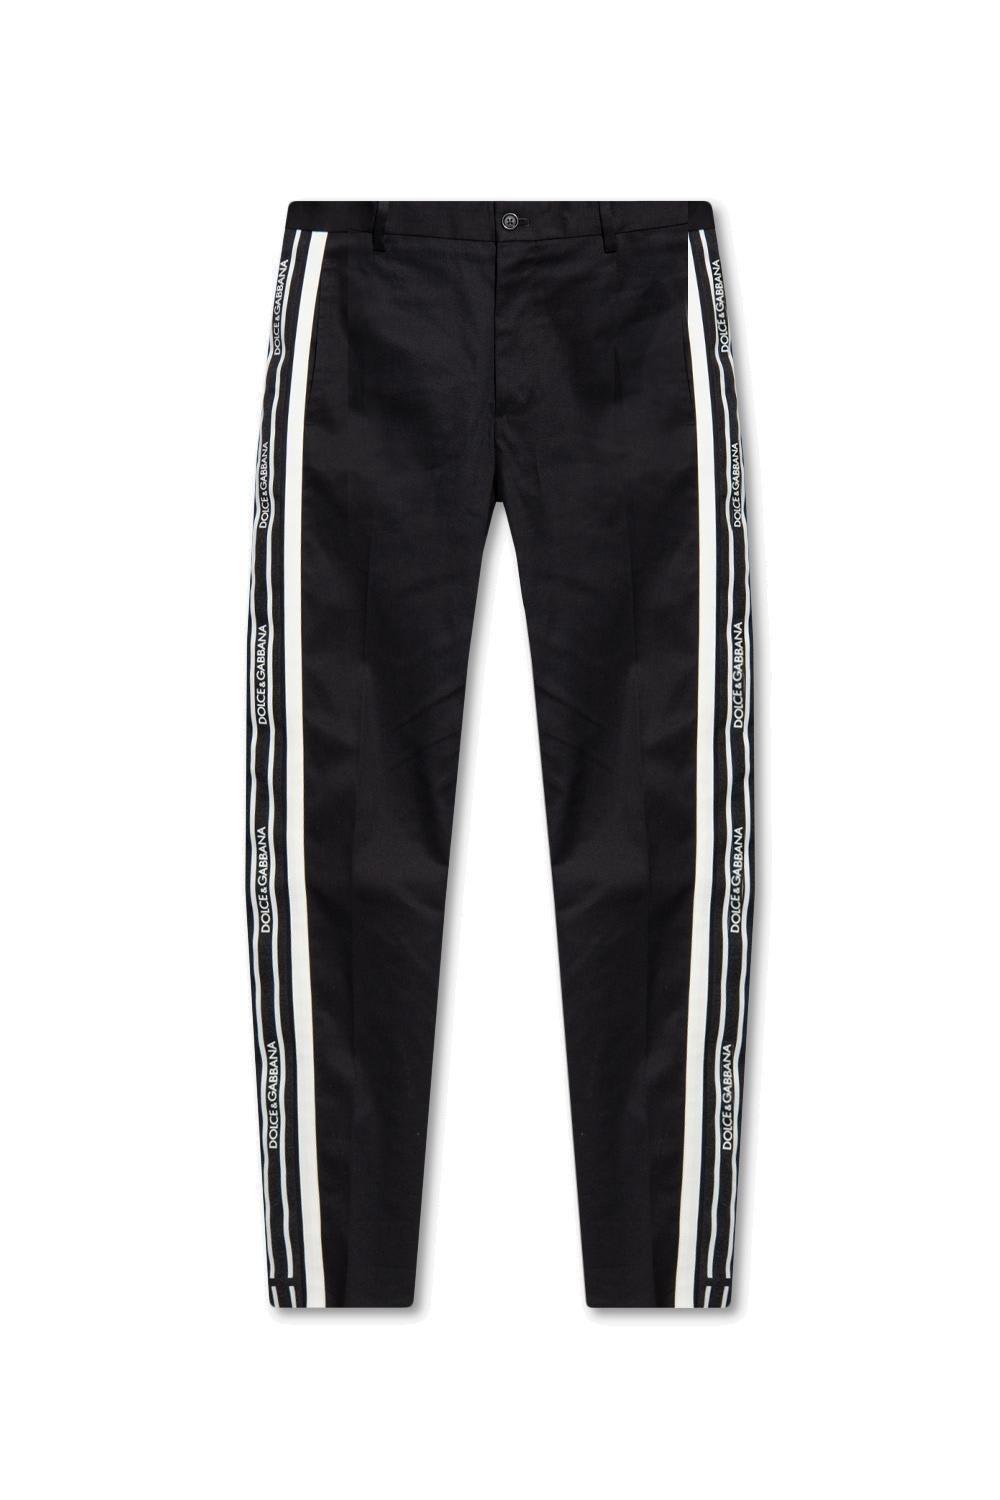 DOLCE & GABBANA SIDE STRIPED TAPERED LEG TROUSERS